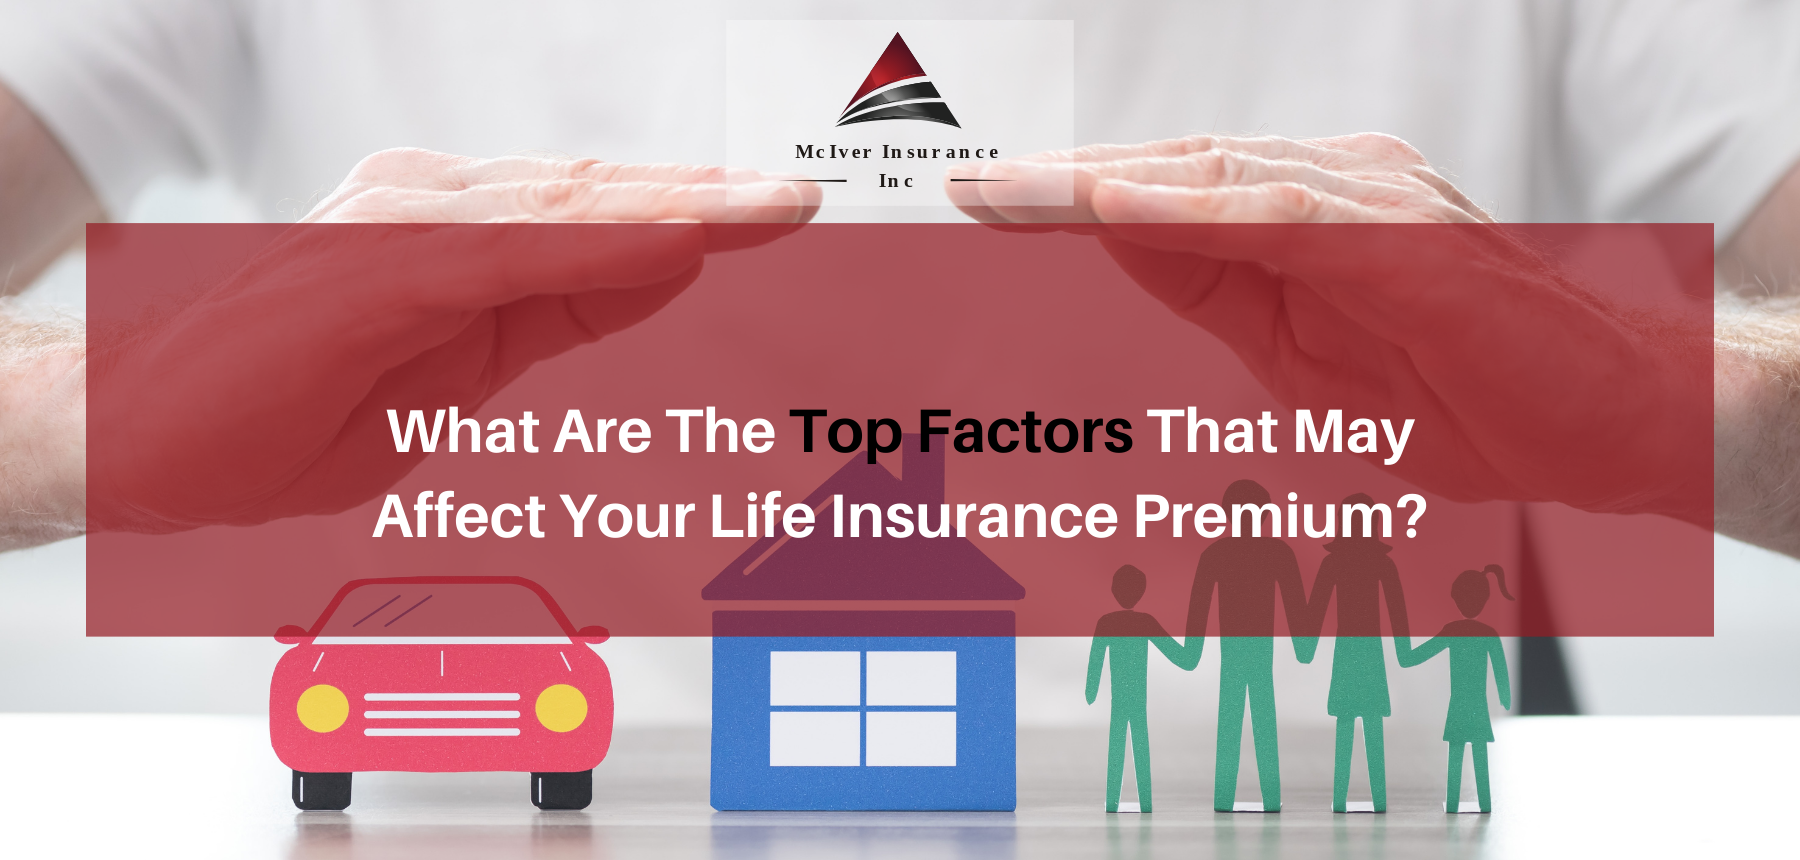 What Are The Top Factors That May Affect Your Life Insurance Premium